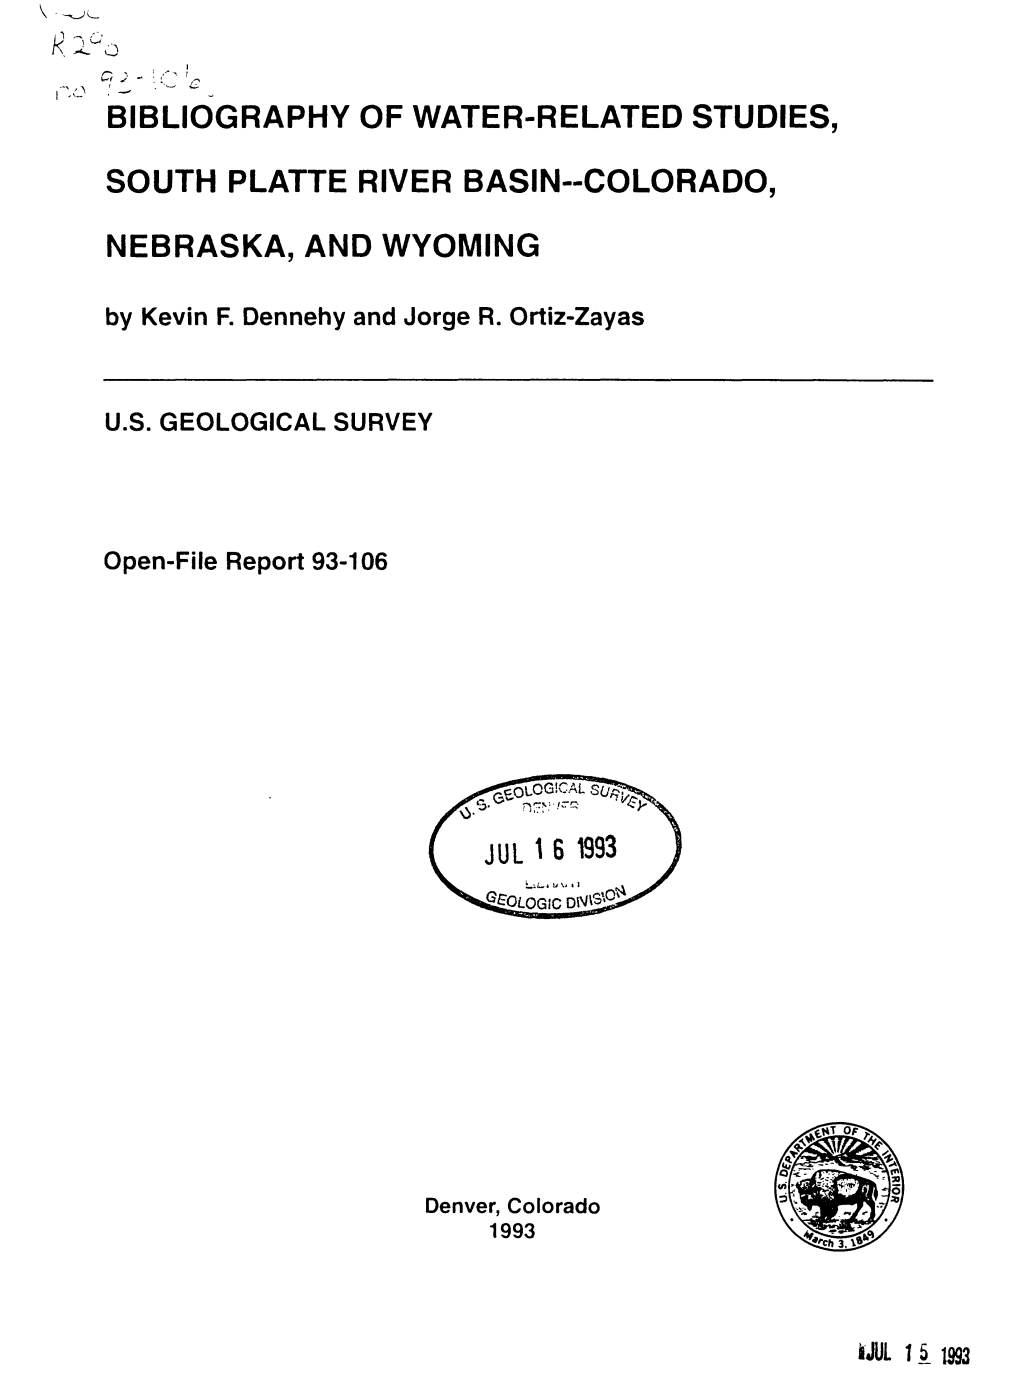 Bibliography of Water-Related Studies, South Platte River Basin-Colorado, Nebraska, and Wyoming